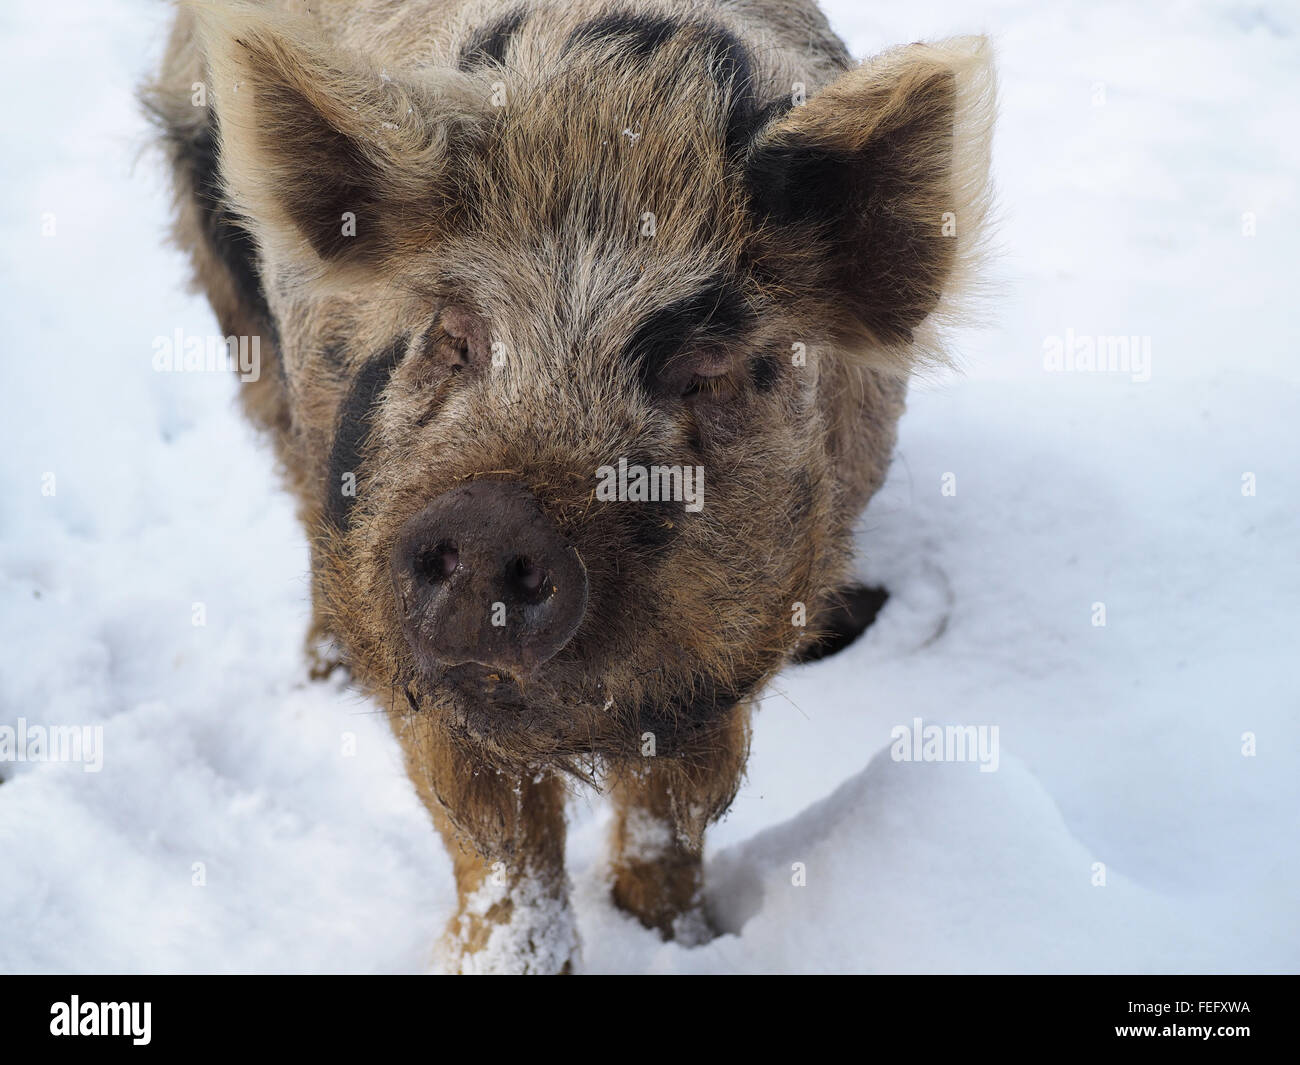 snout of hairy old pig in Winter snow Stock Photo